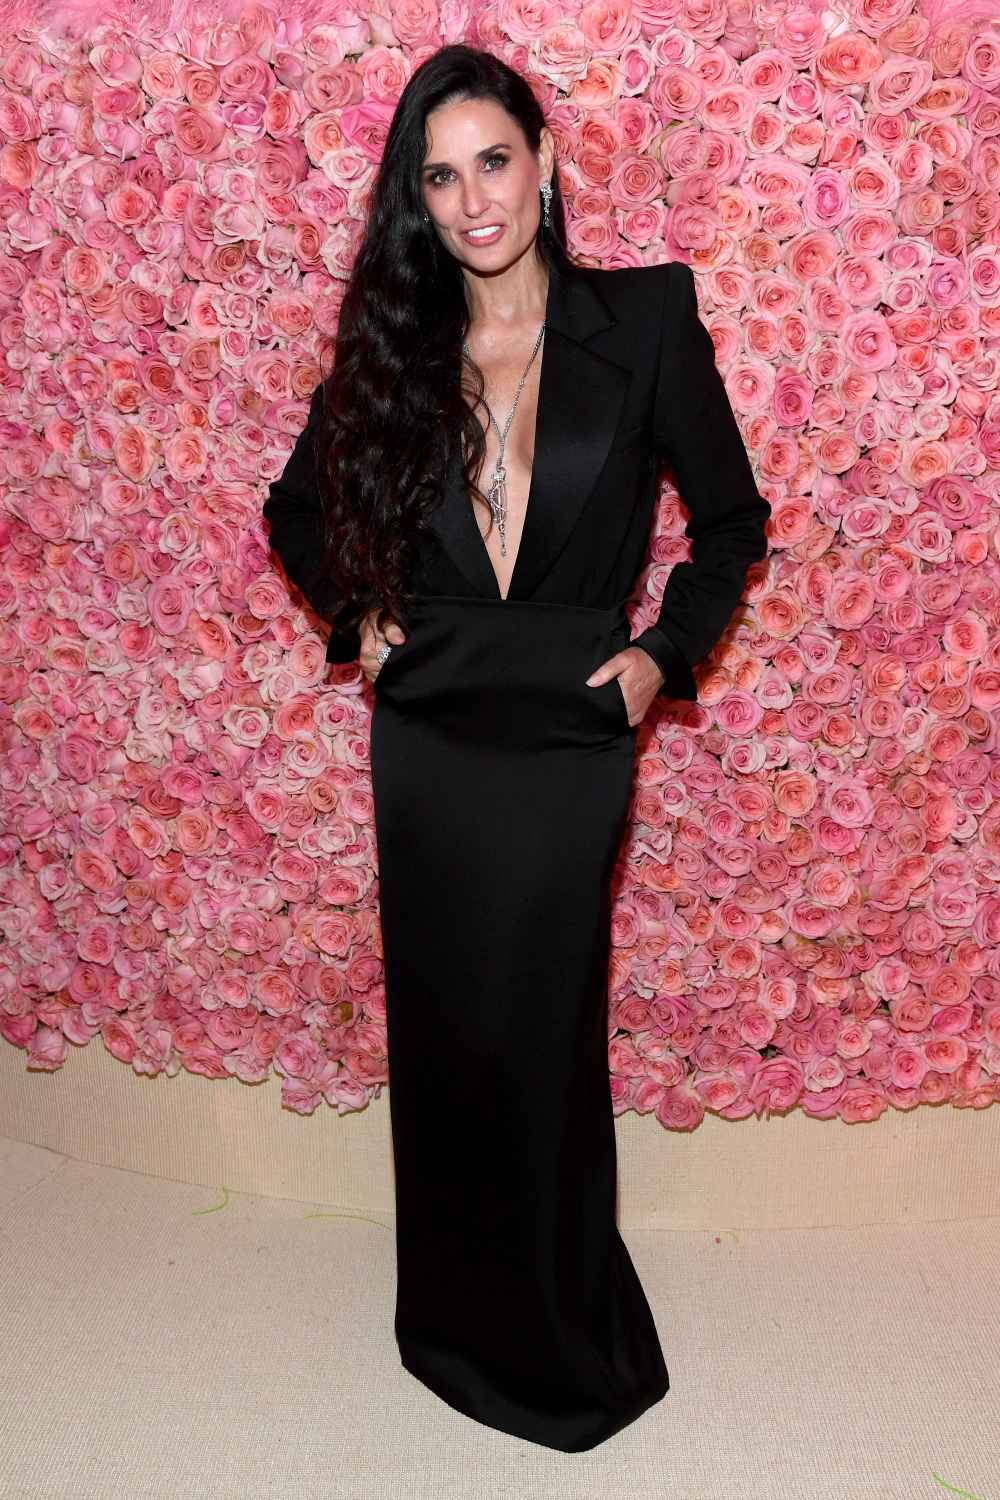 Demi Moore Didn’t Work Out for ‘Over 4 Years,’ Makes Return With the Mirror The 2019 Met Gala